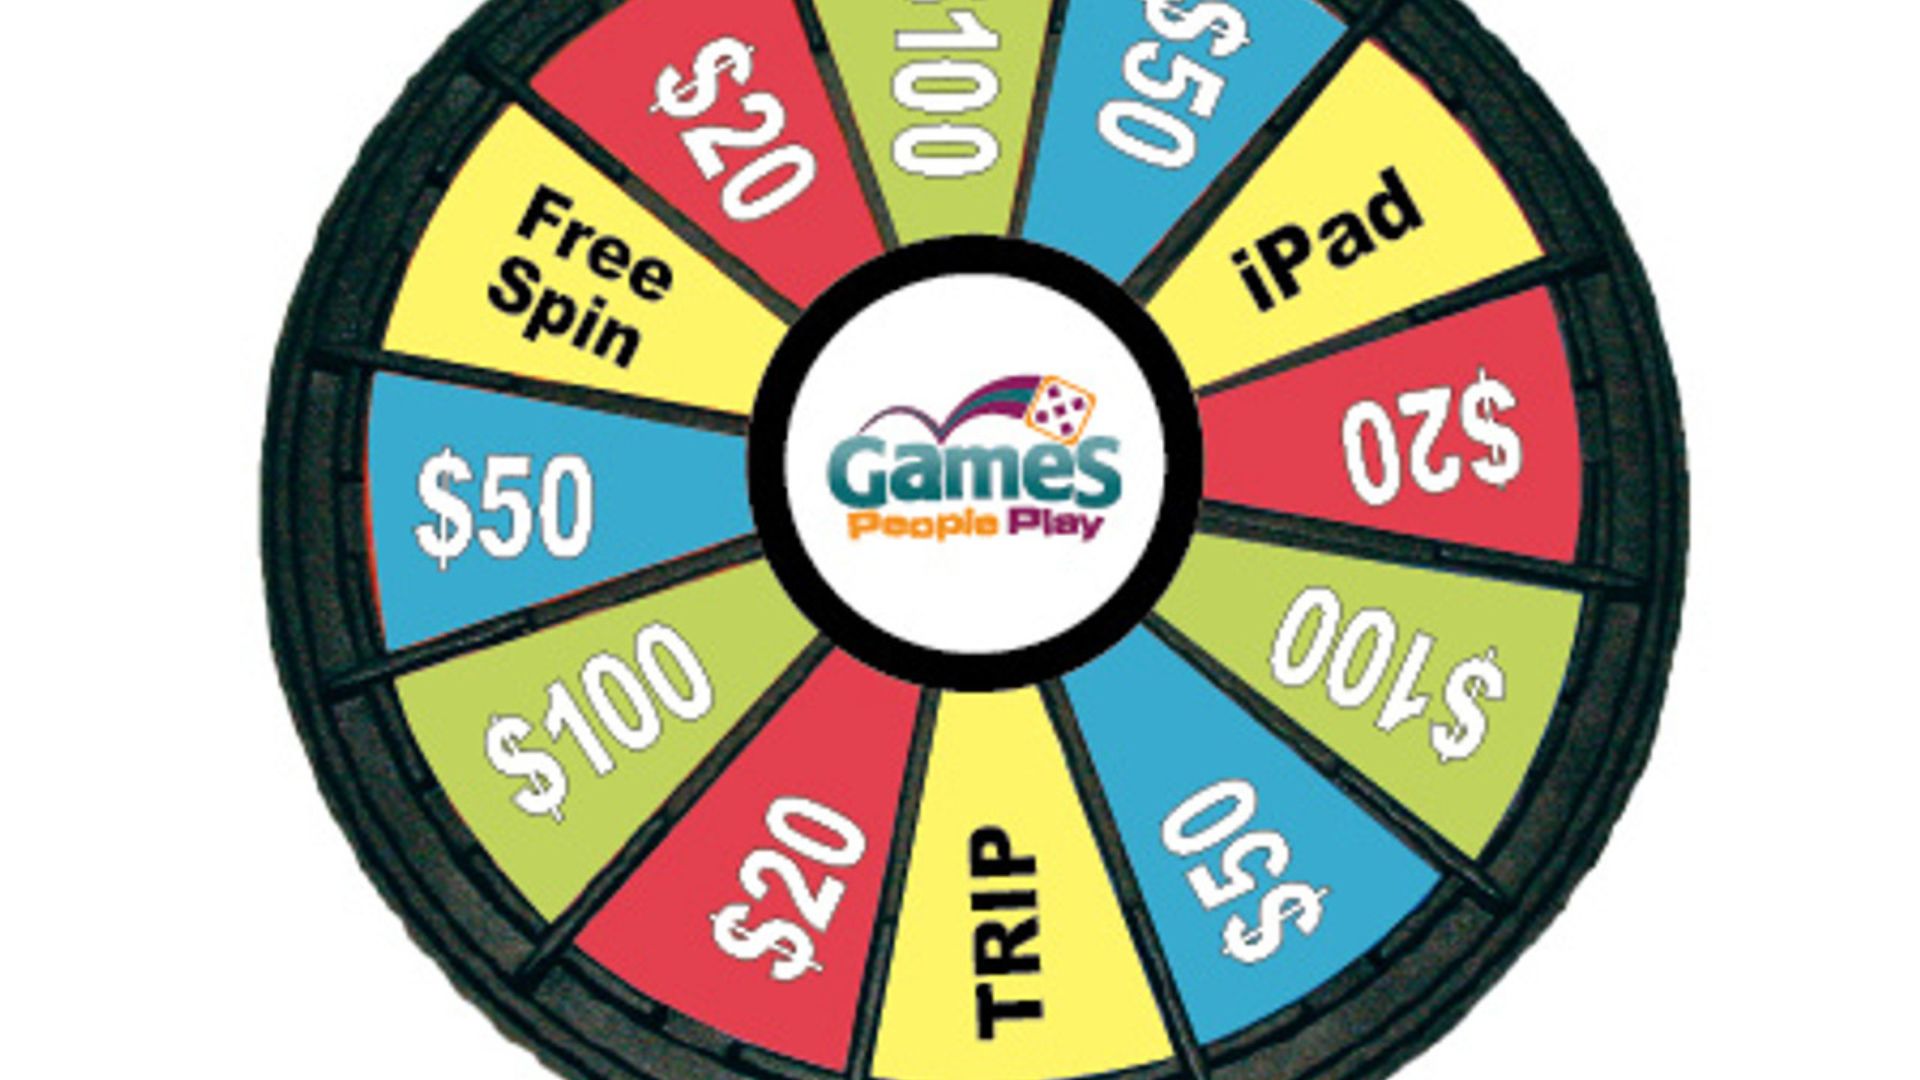 this image shows one of the Spin Wheel Templates